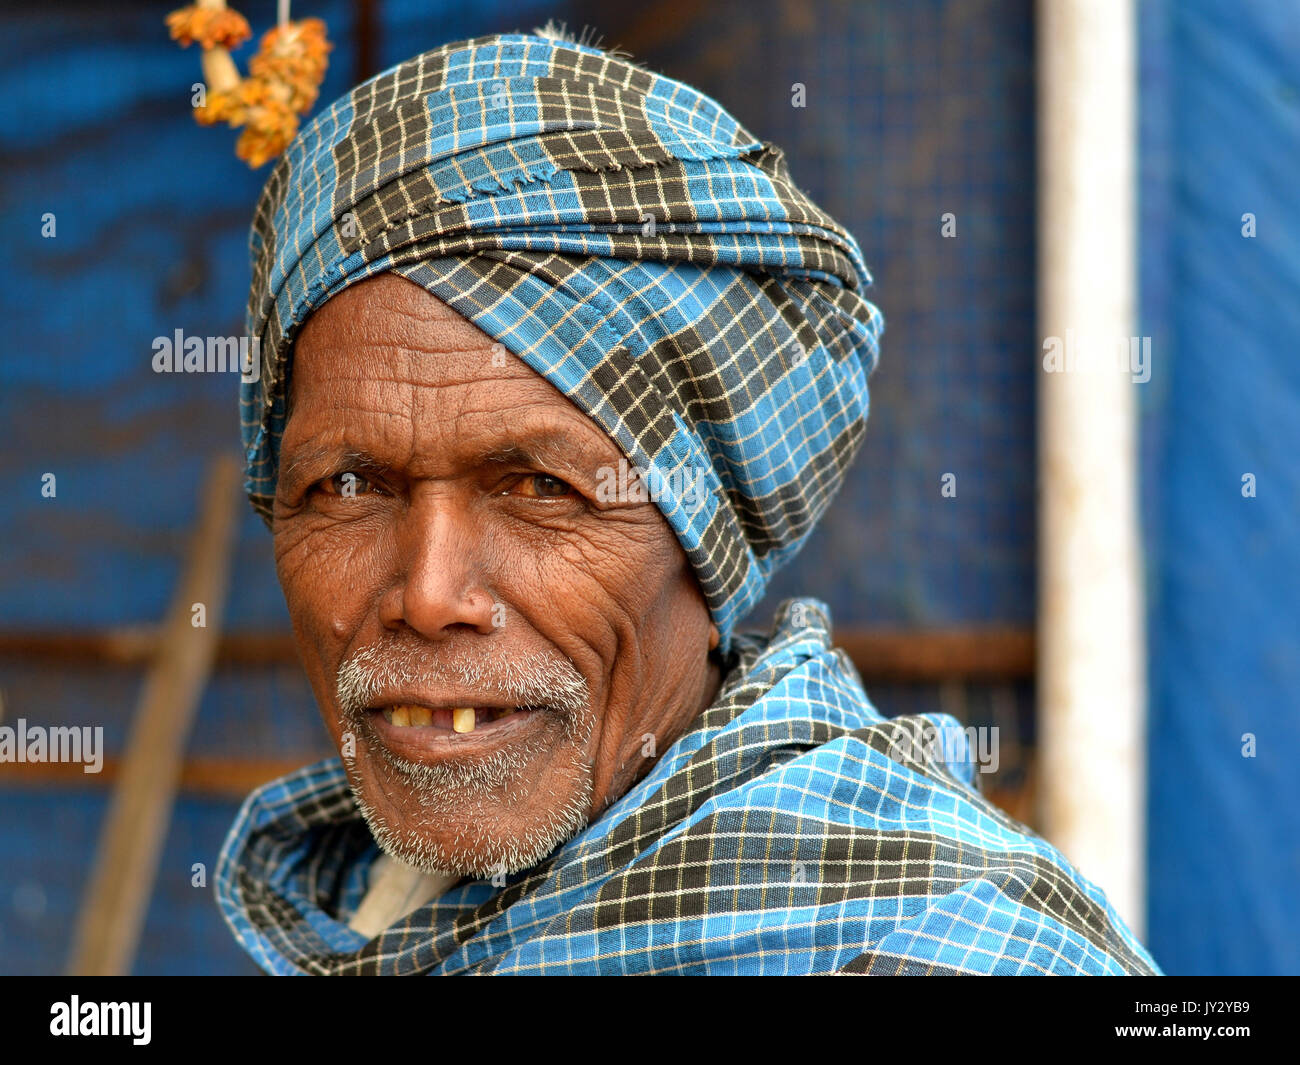 Old Indian Adivasi man wears a blue-checkered turban and poses for the camera. Stock Photo